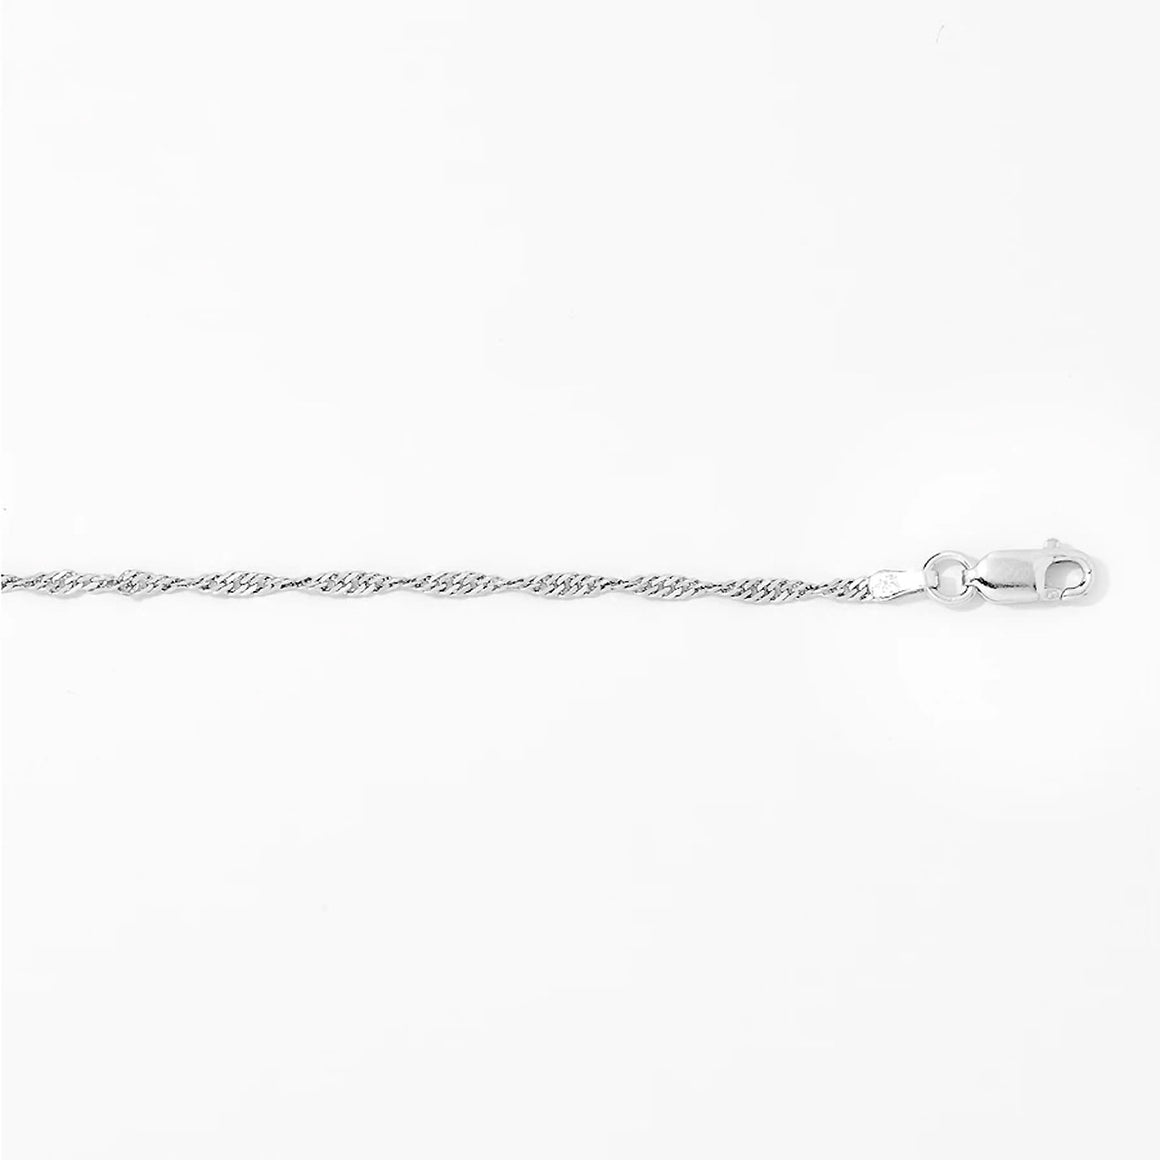 Sterling Silver Singapore Chain Necklace - 36"